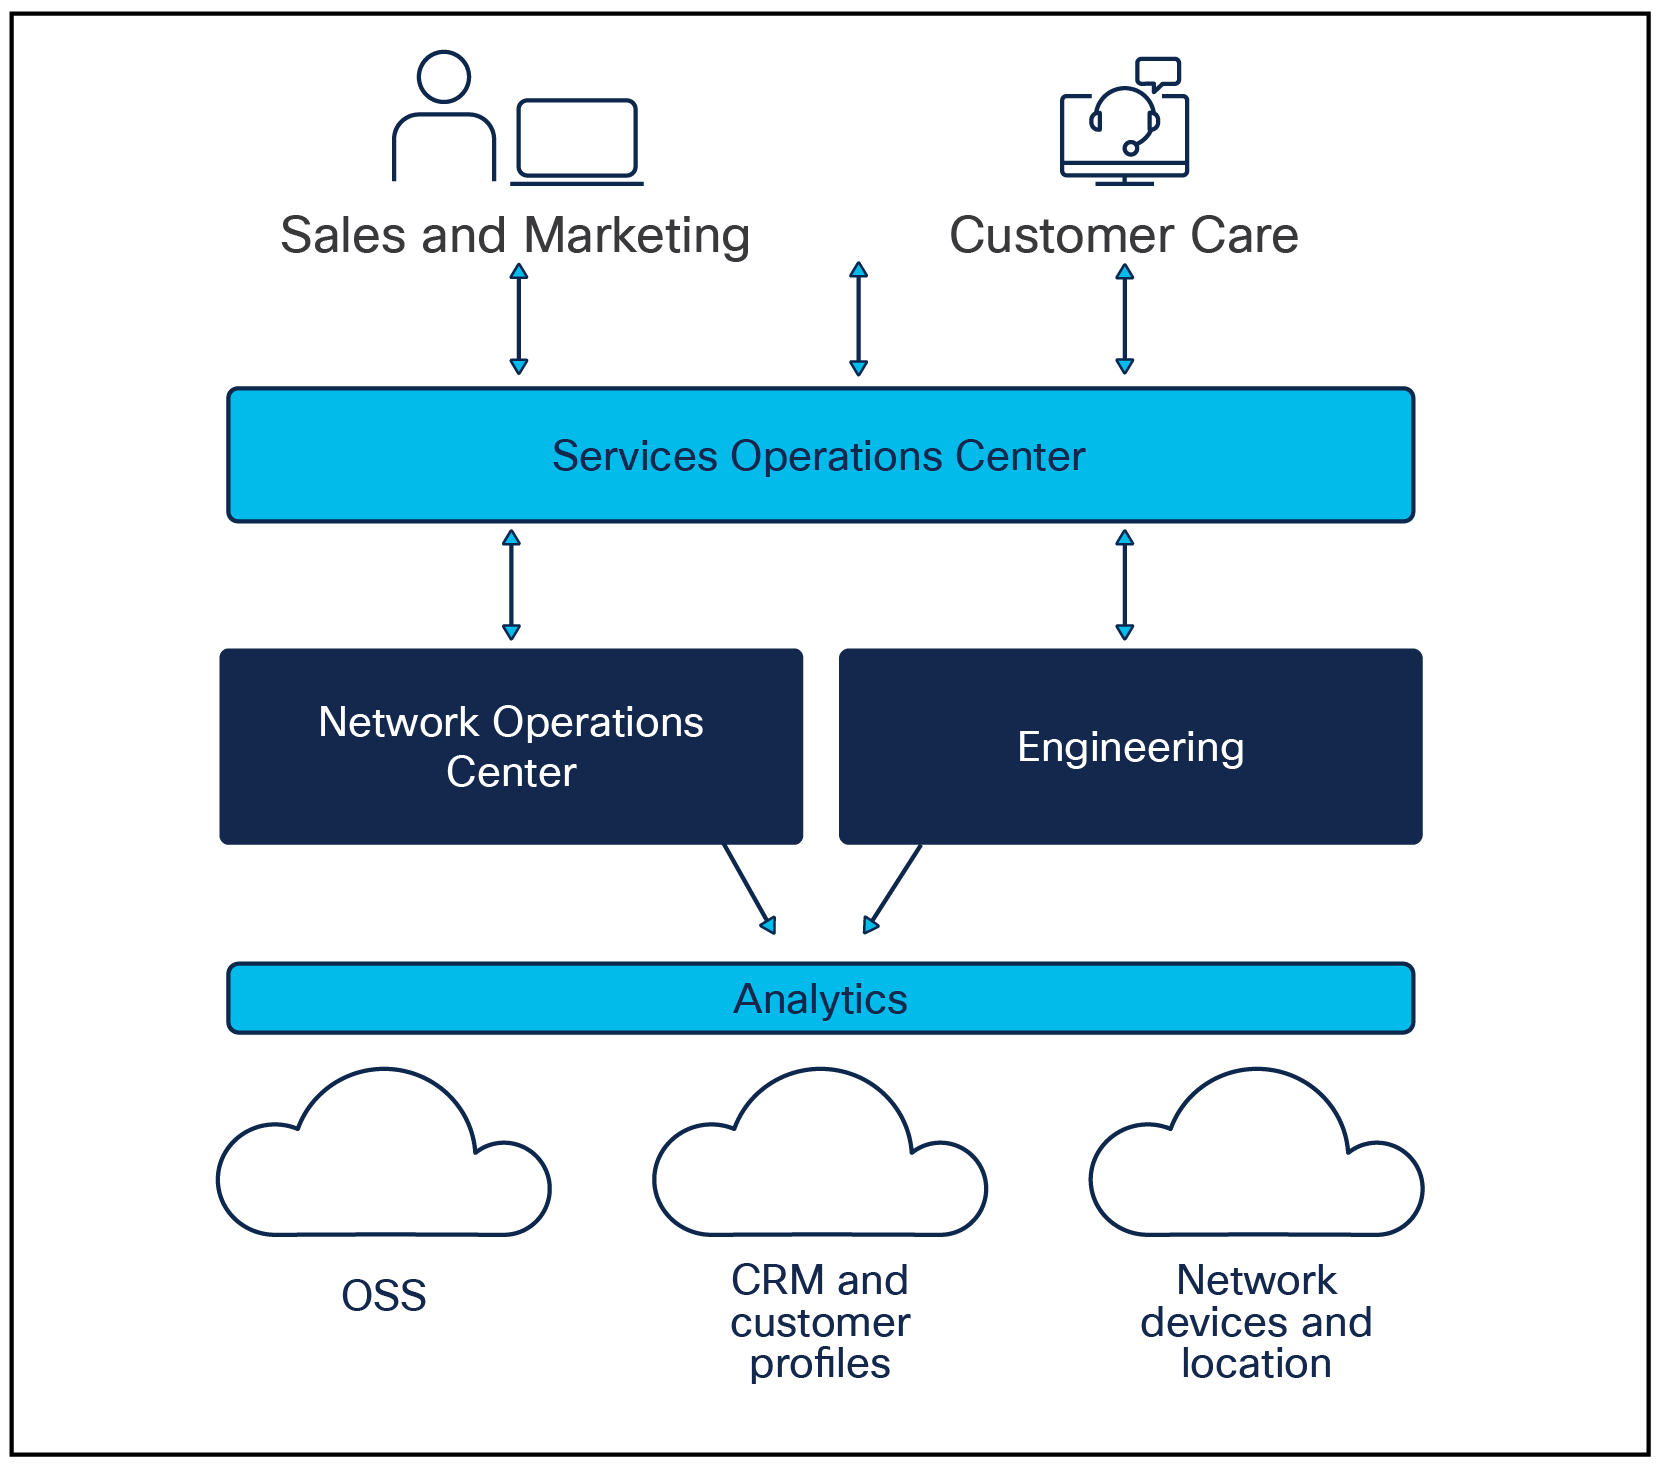 Overview of SOC in organization structure